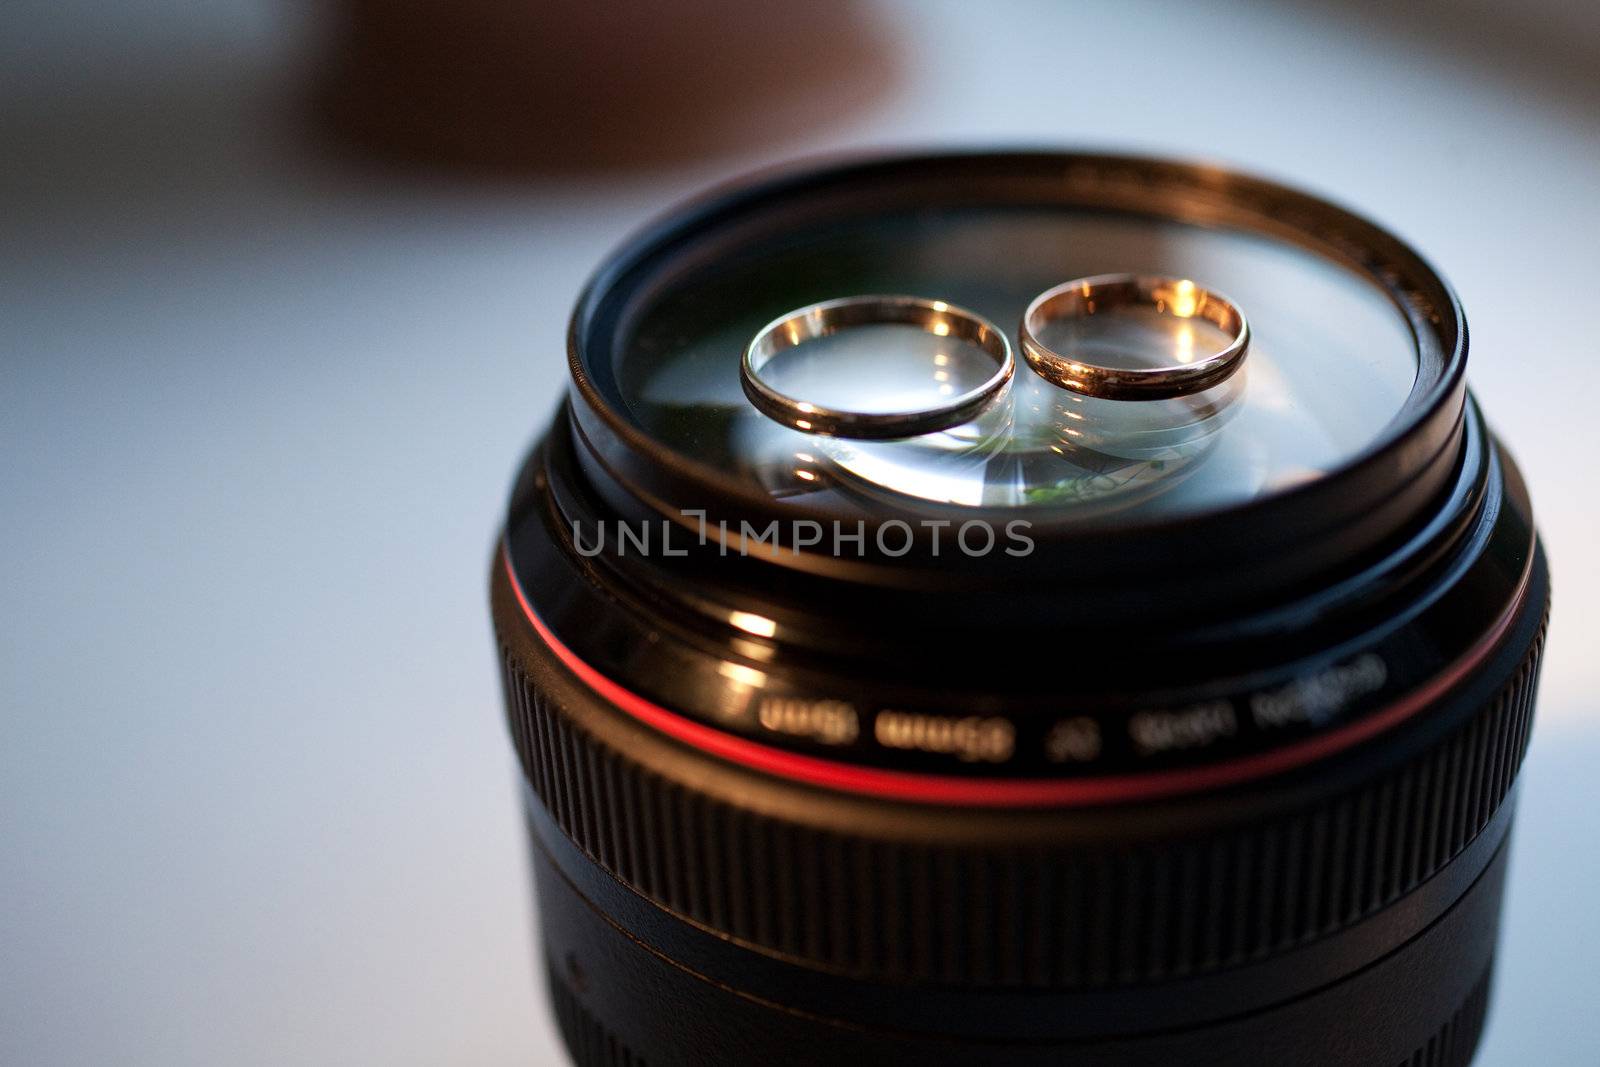 objective lens and rings by vsurkov